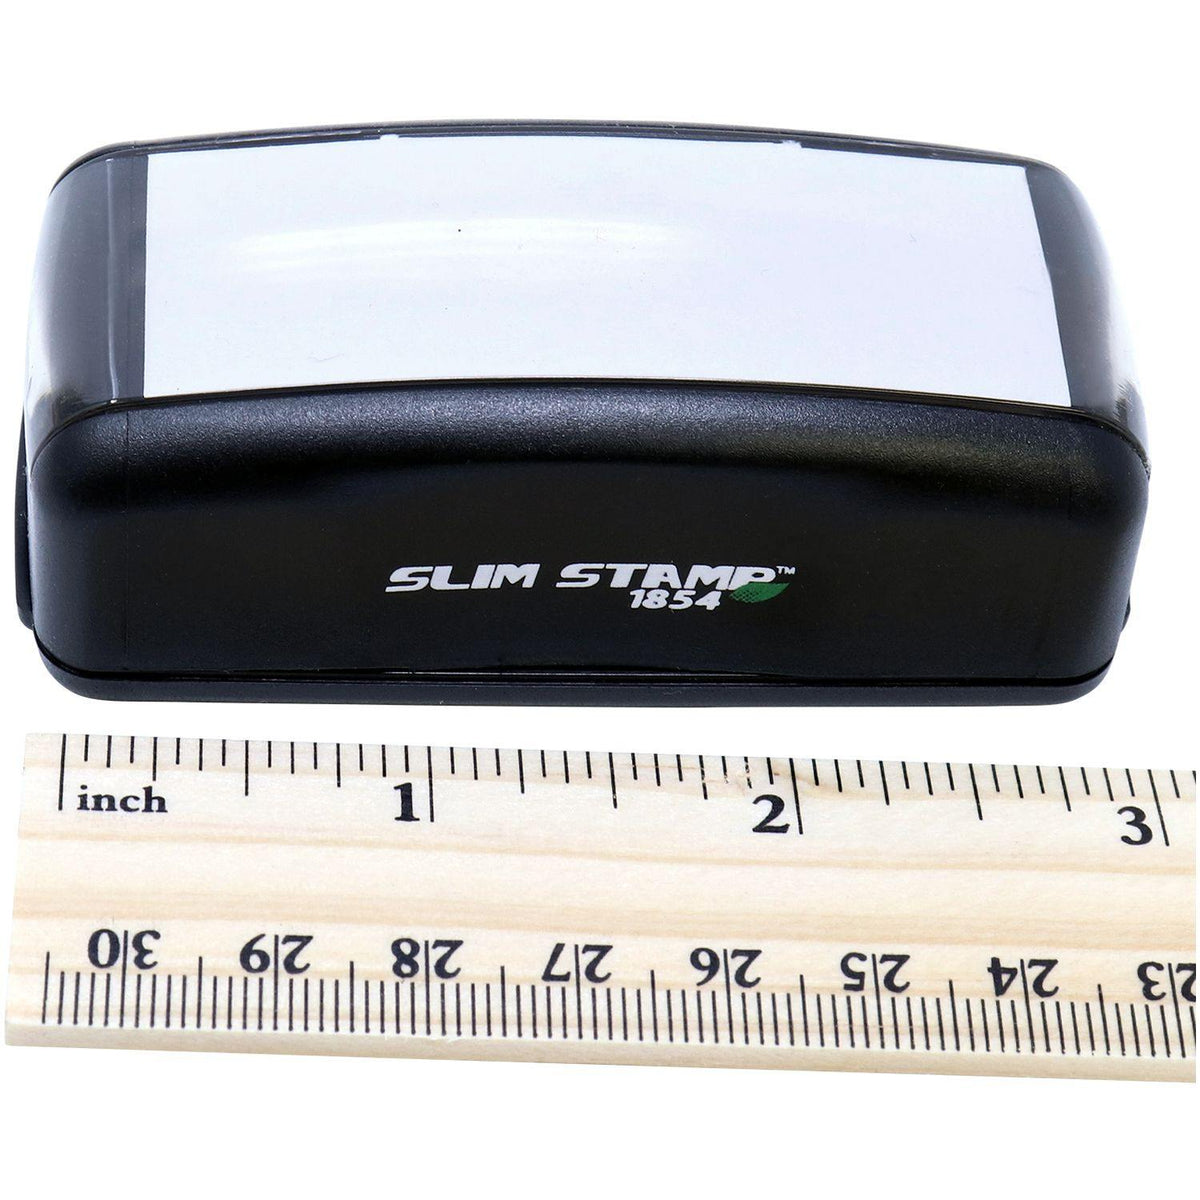 Measurement Large Pre Inked Verified Stamp with Ruler